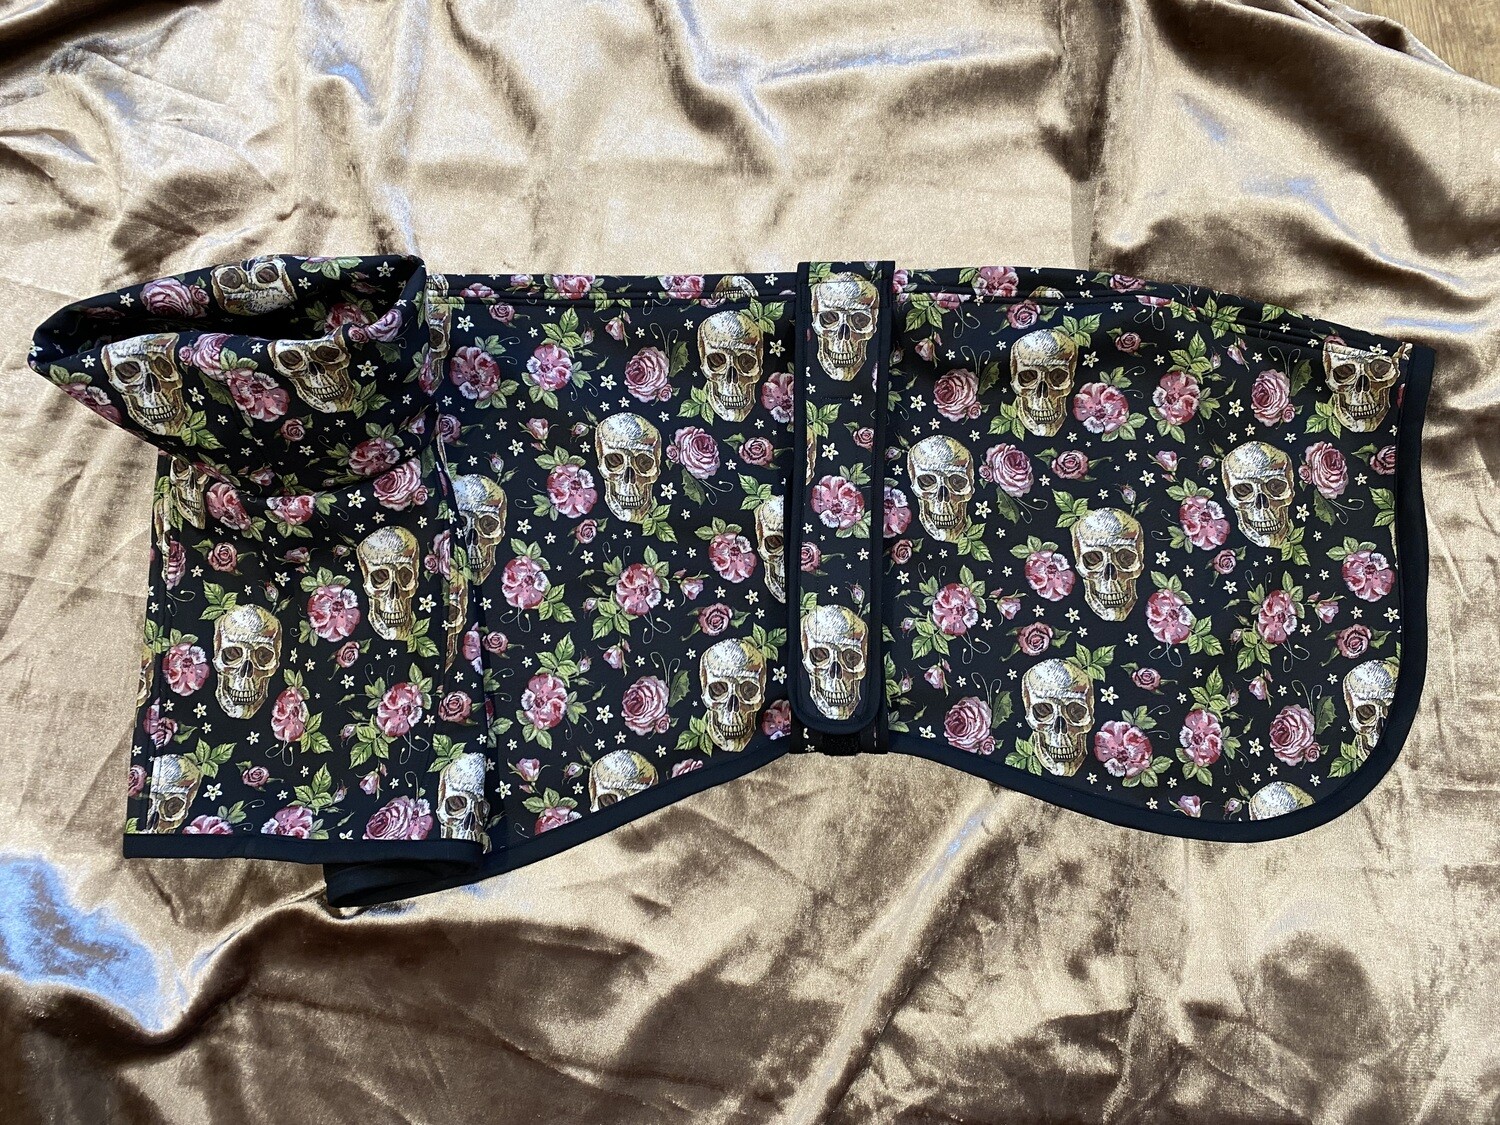 32" Skulls and Roses Print Fleece Lined Raincoat - CUT OUT AND READY TO SEW!